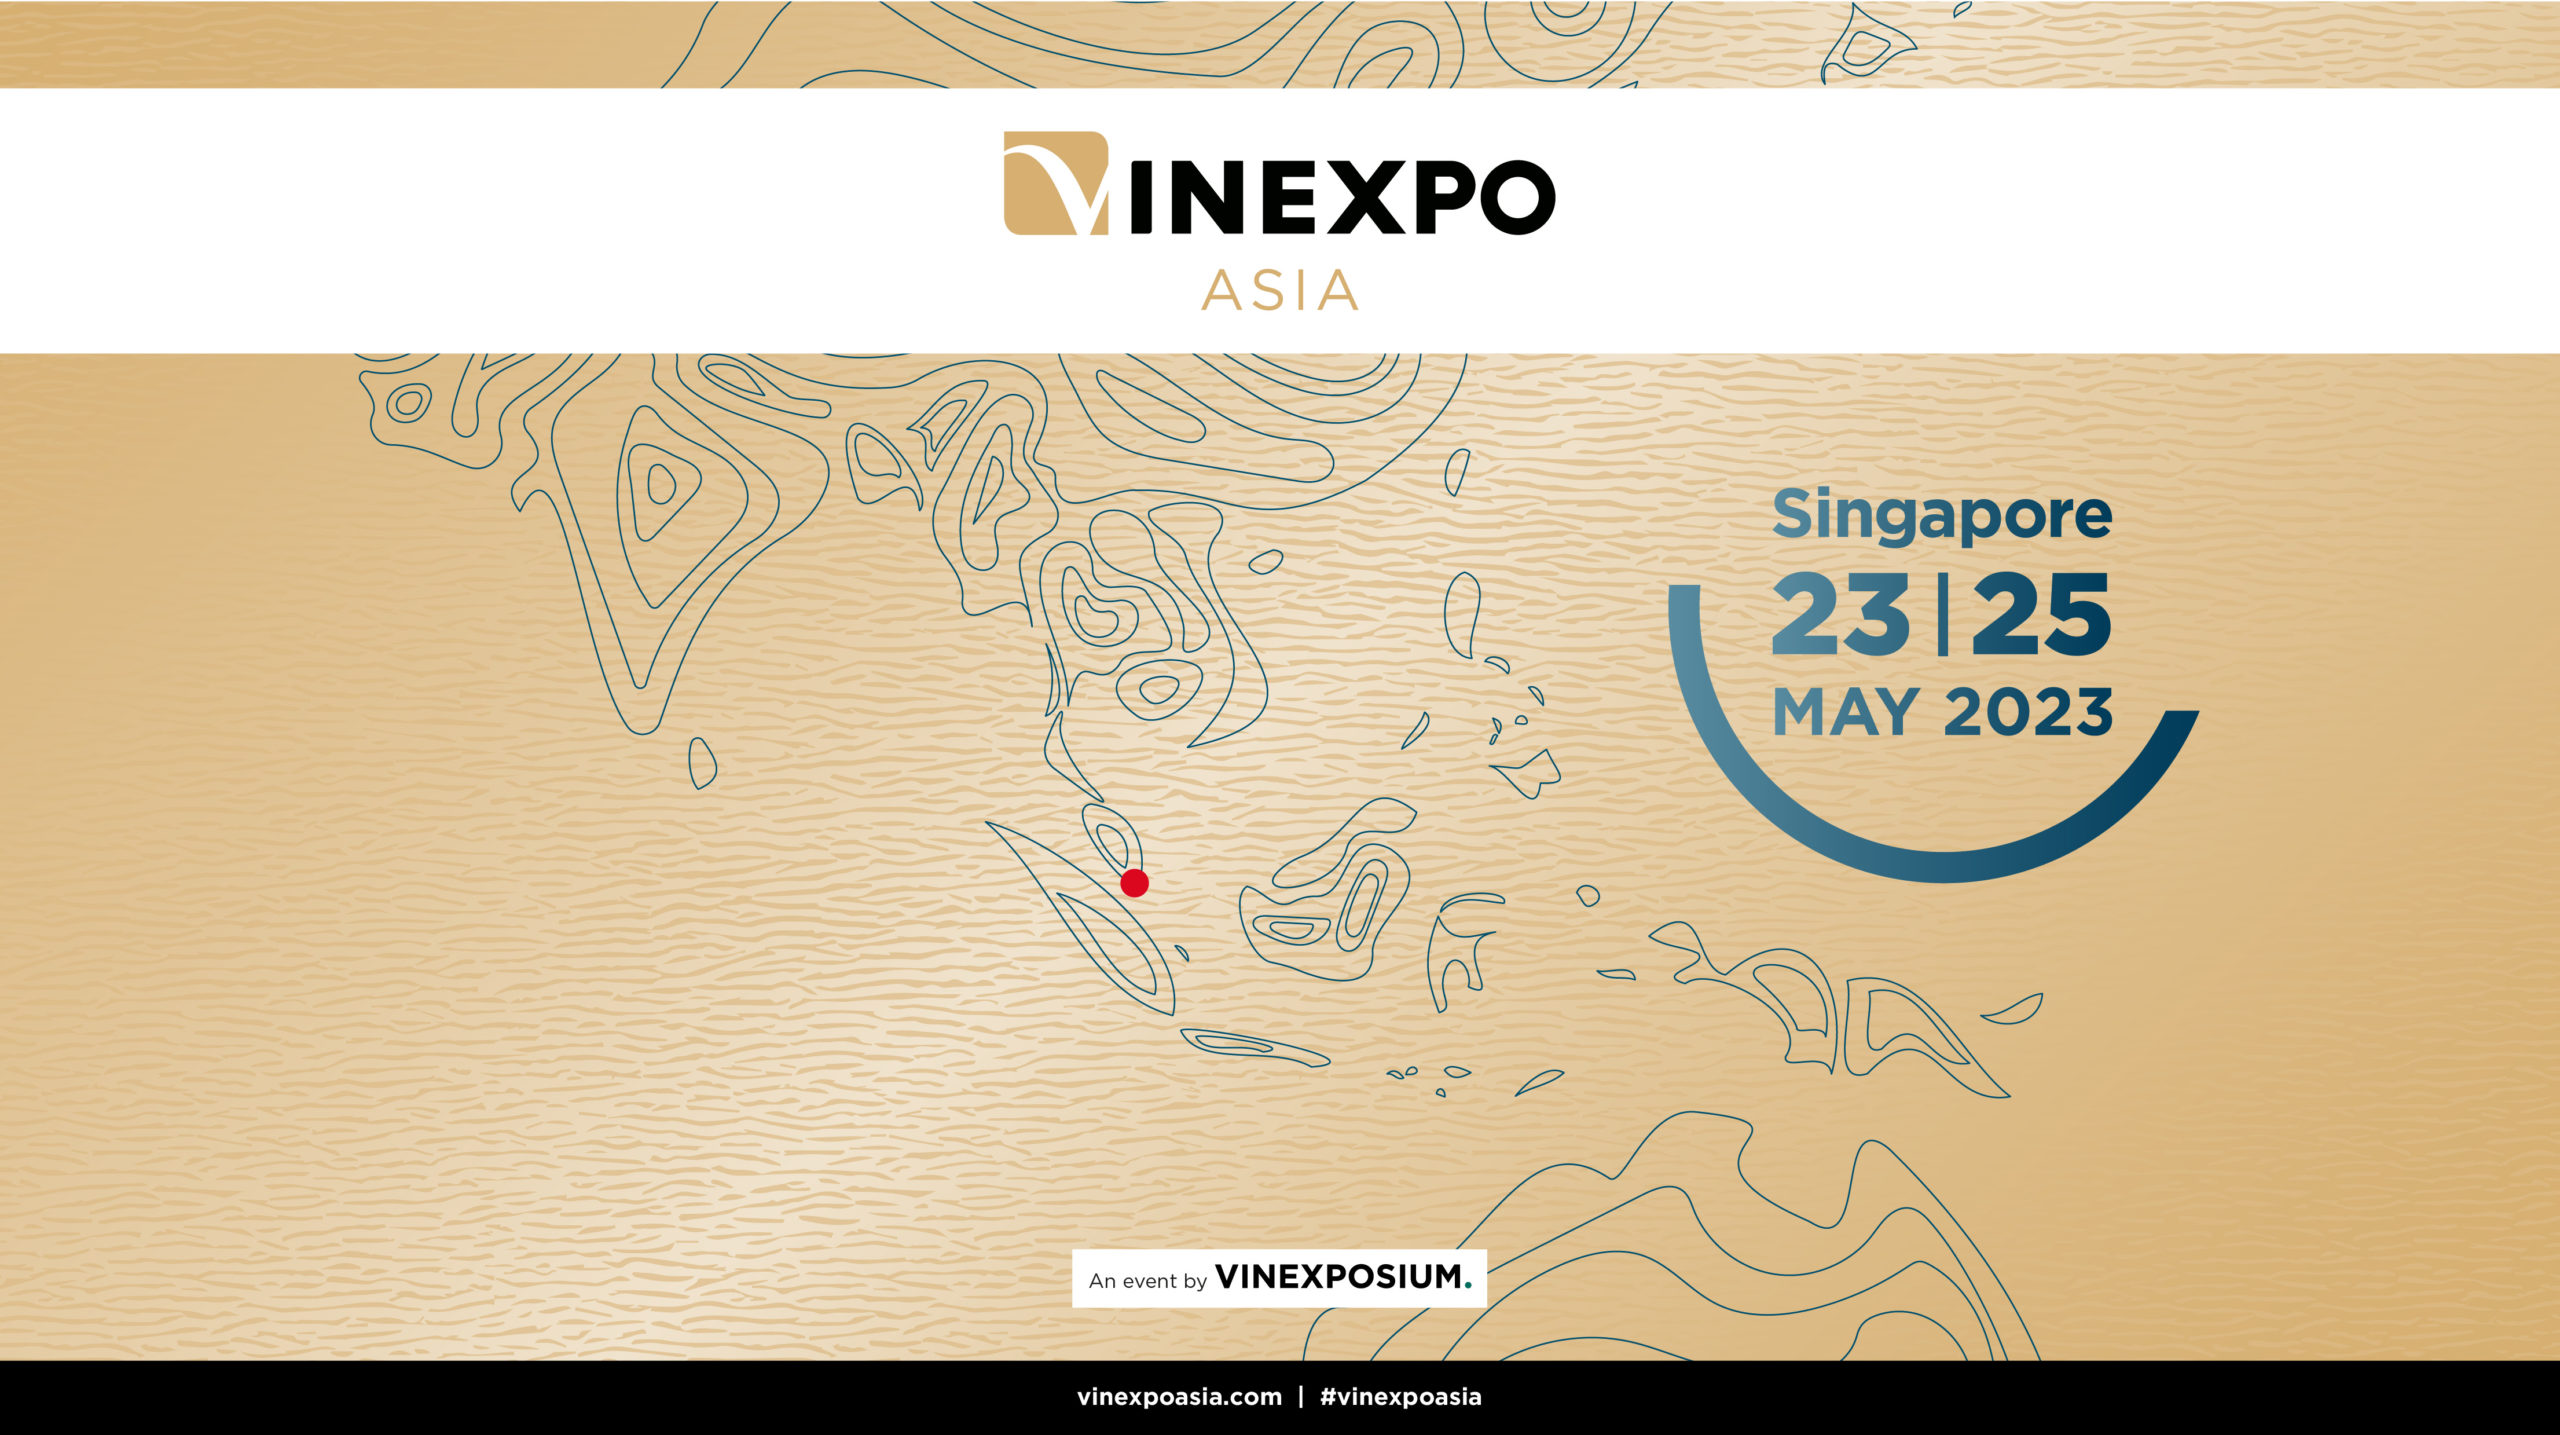 Vinexpo Asia is moving to Singapore